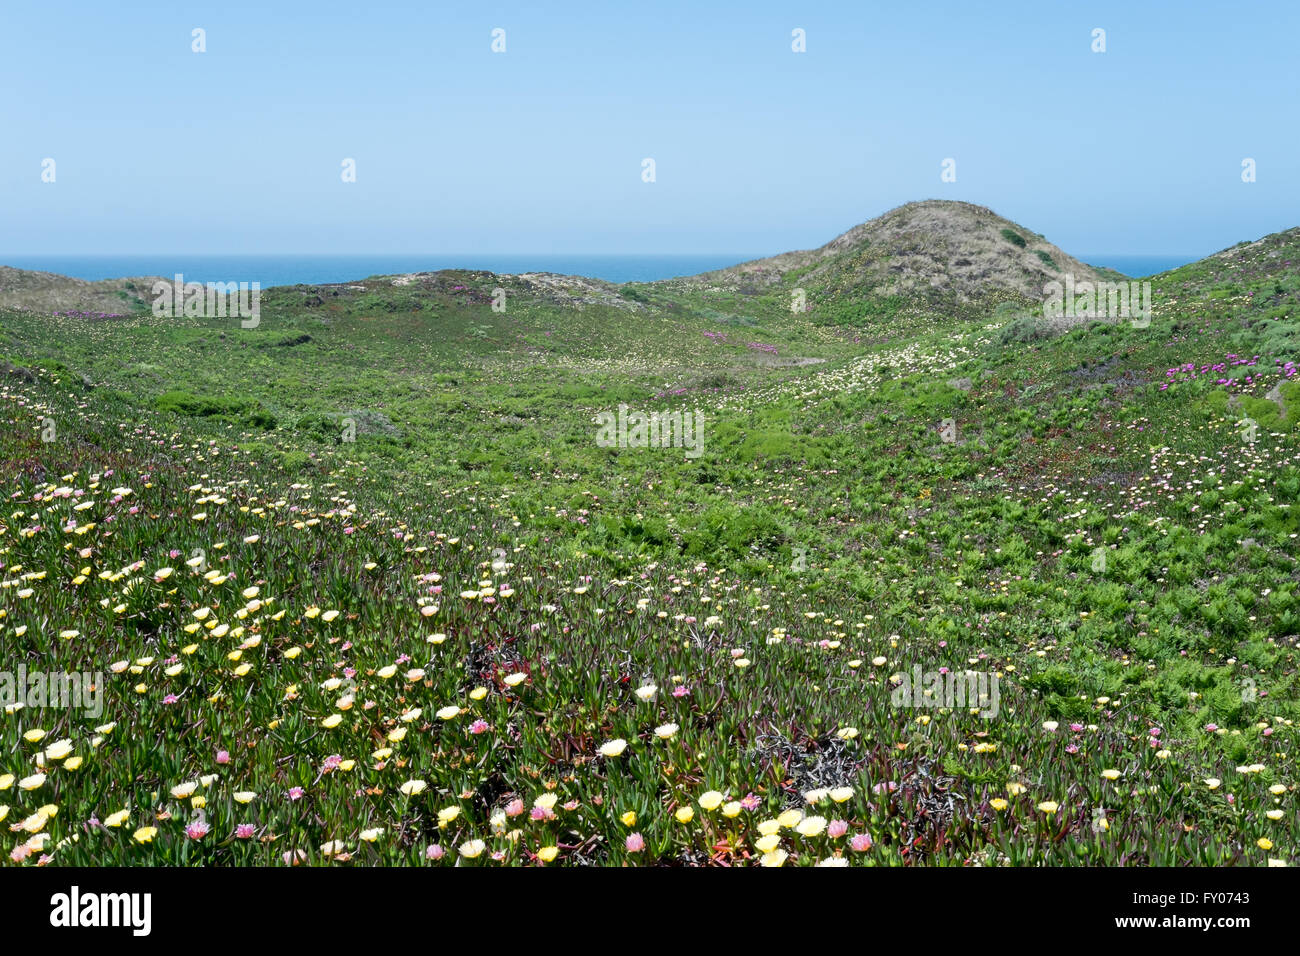 California seaside dunes covered with pink, yellow and white ice plant (figwort) Stock Photo